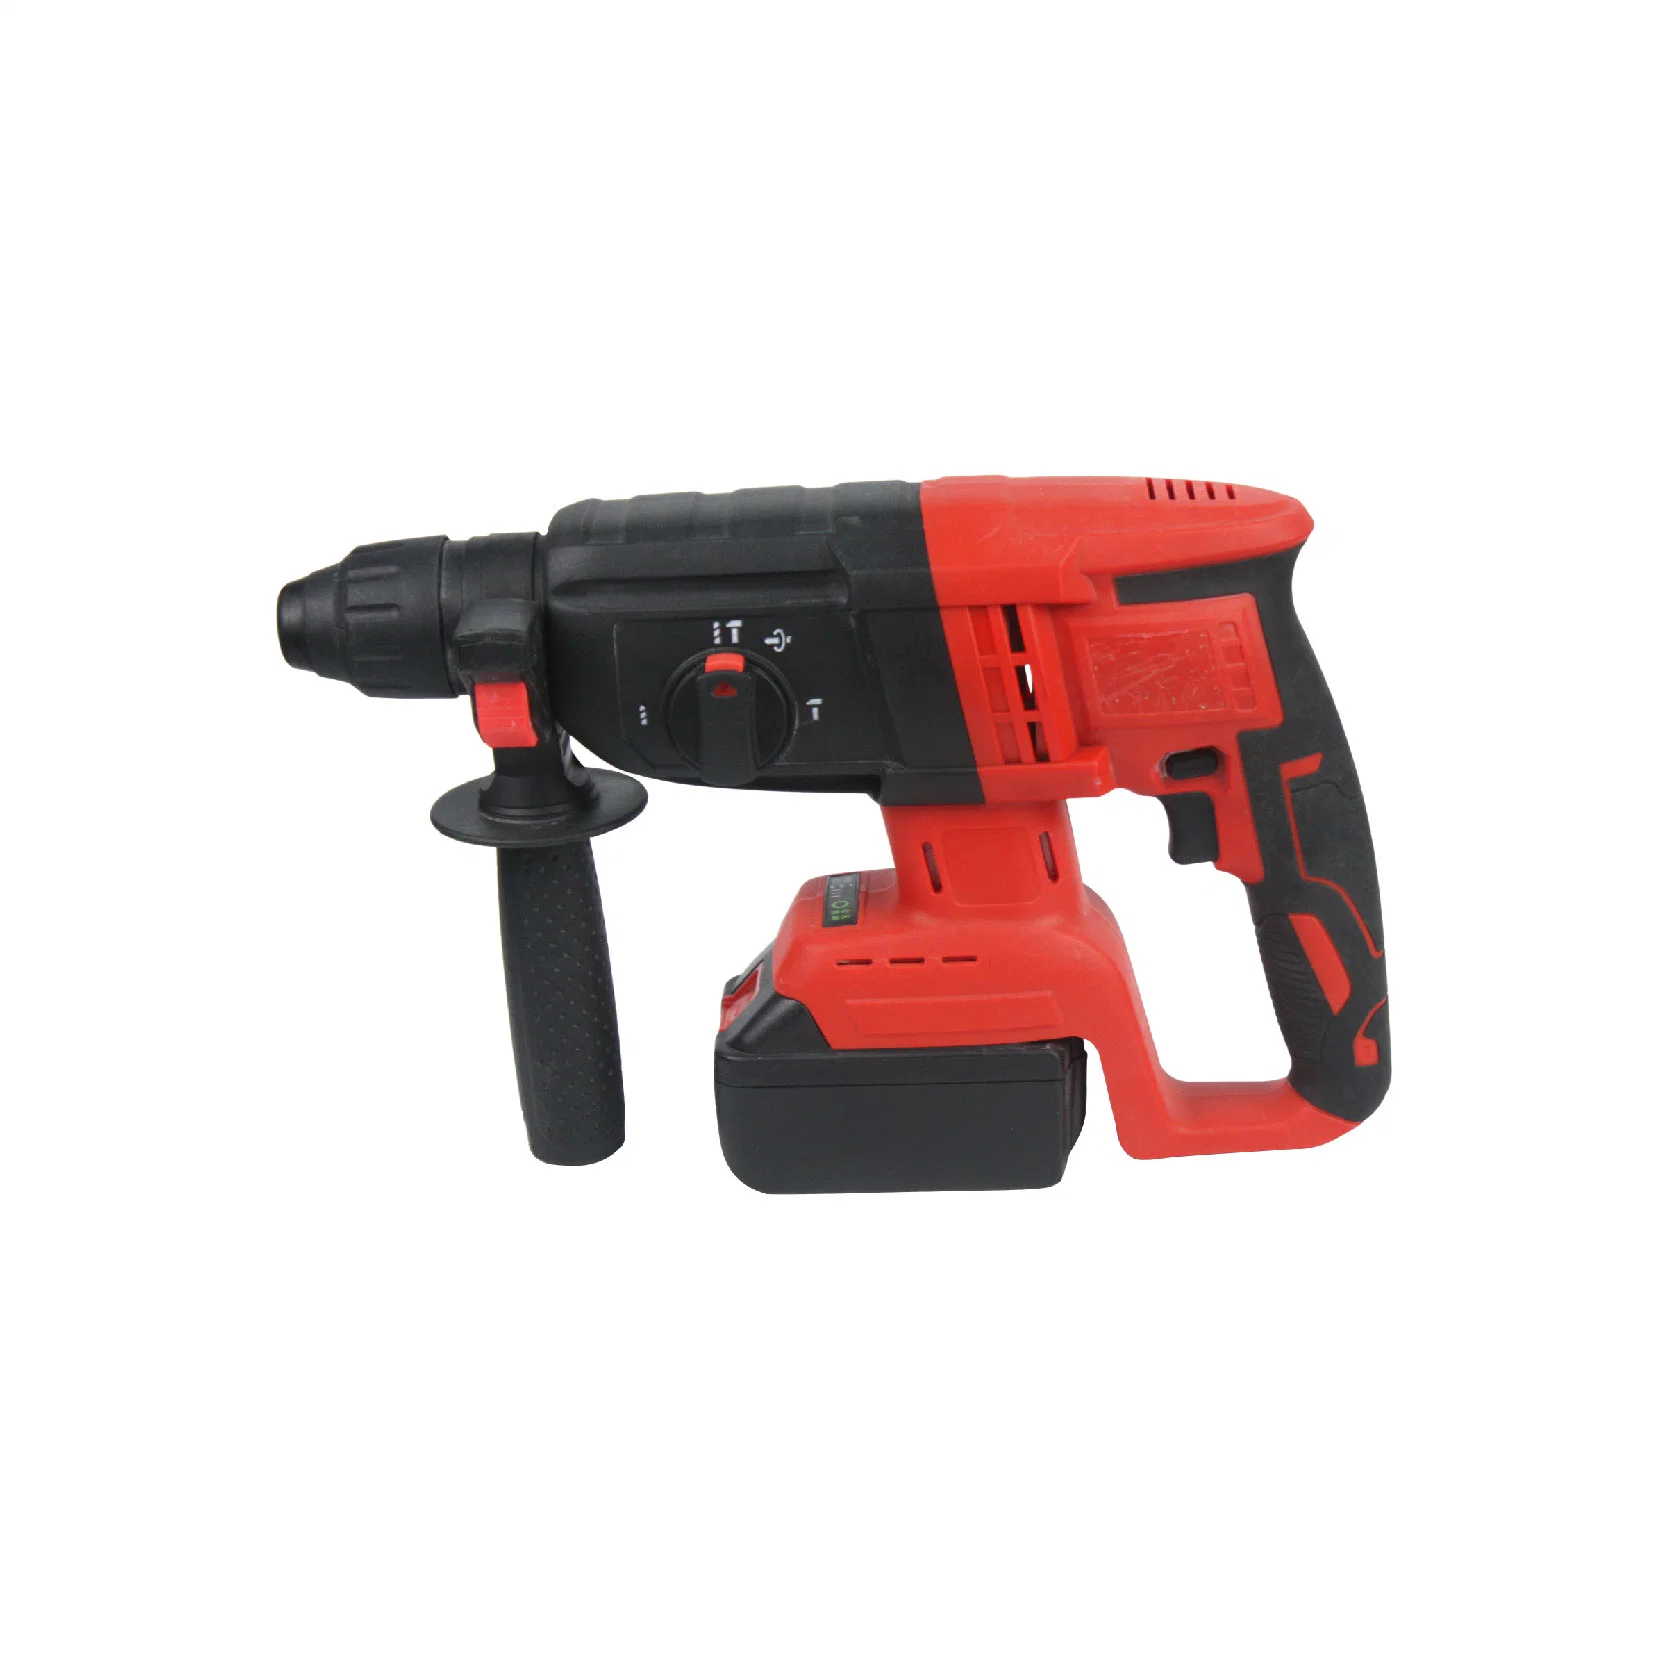 20V Rechargeable Li-ion Battery Cordless Rotary Hammer Drill Set with Competitive Price